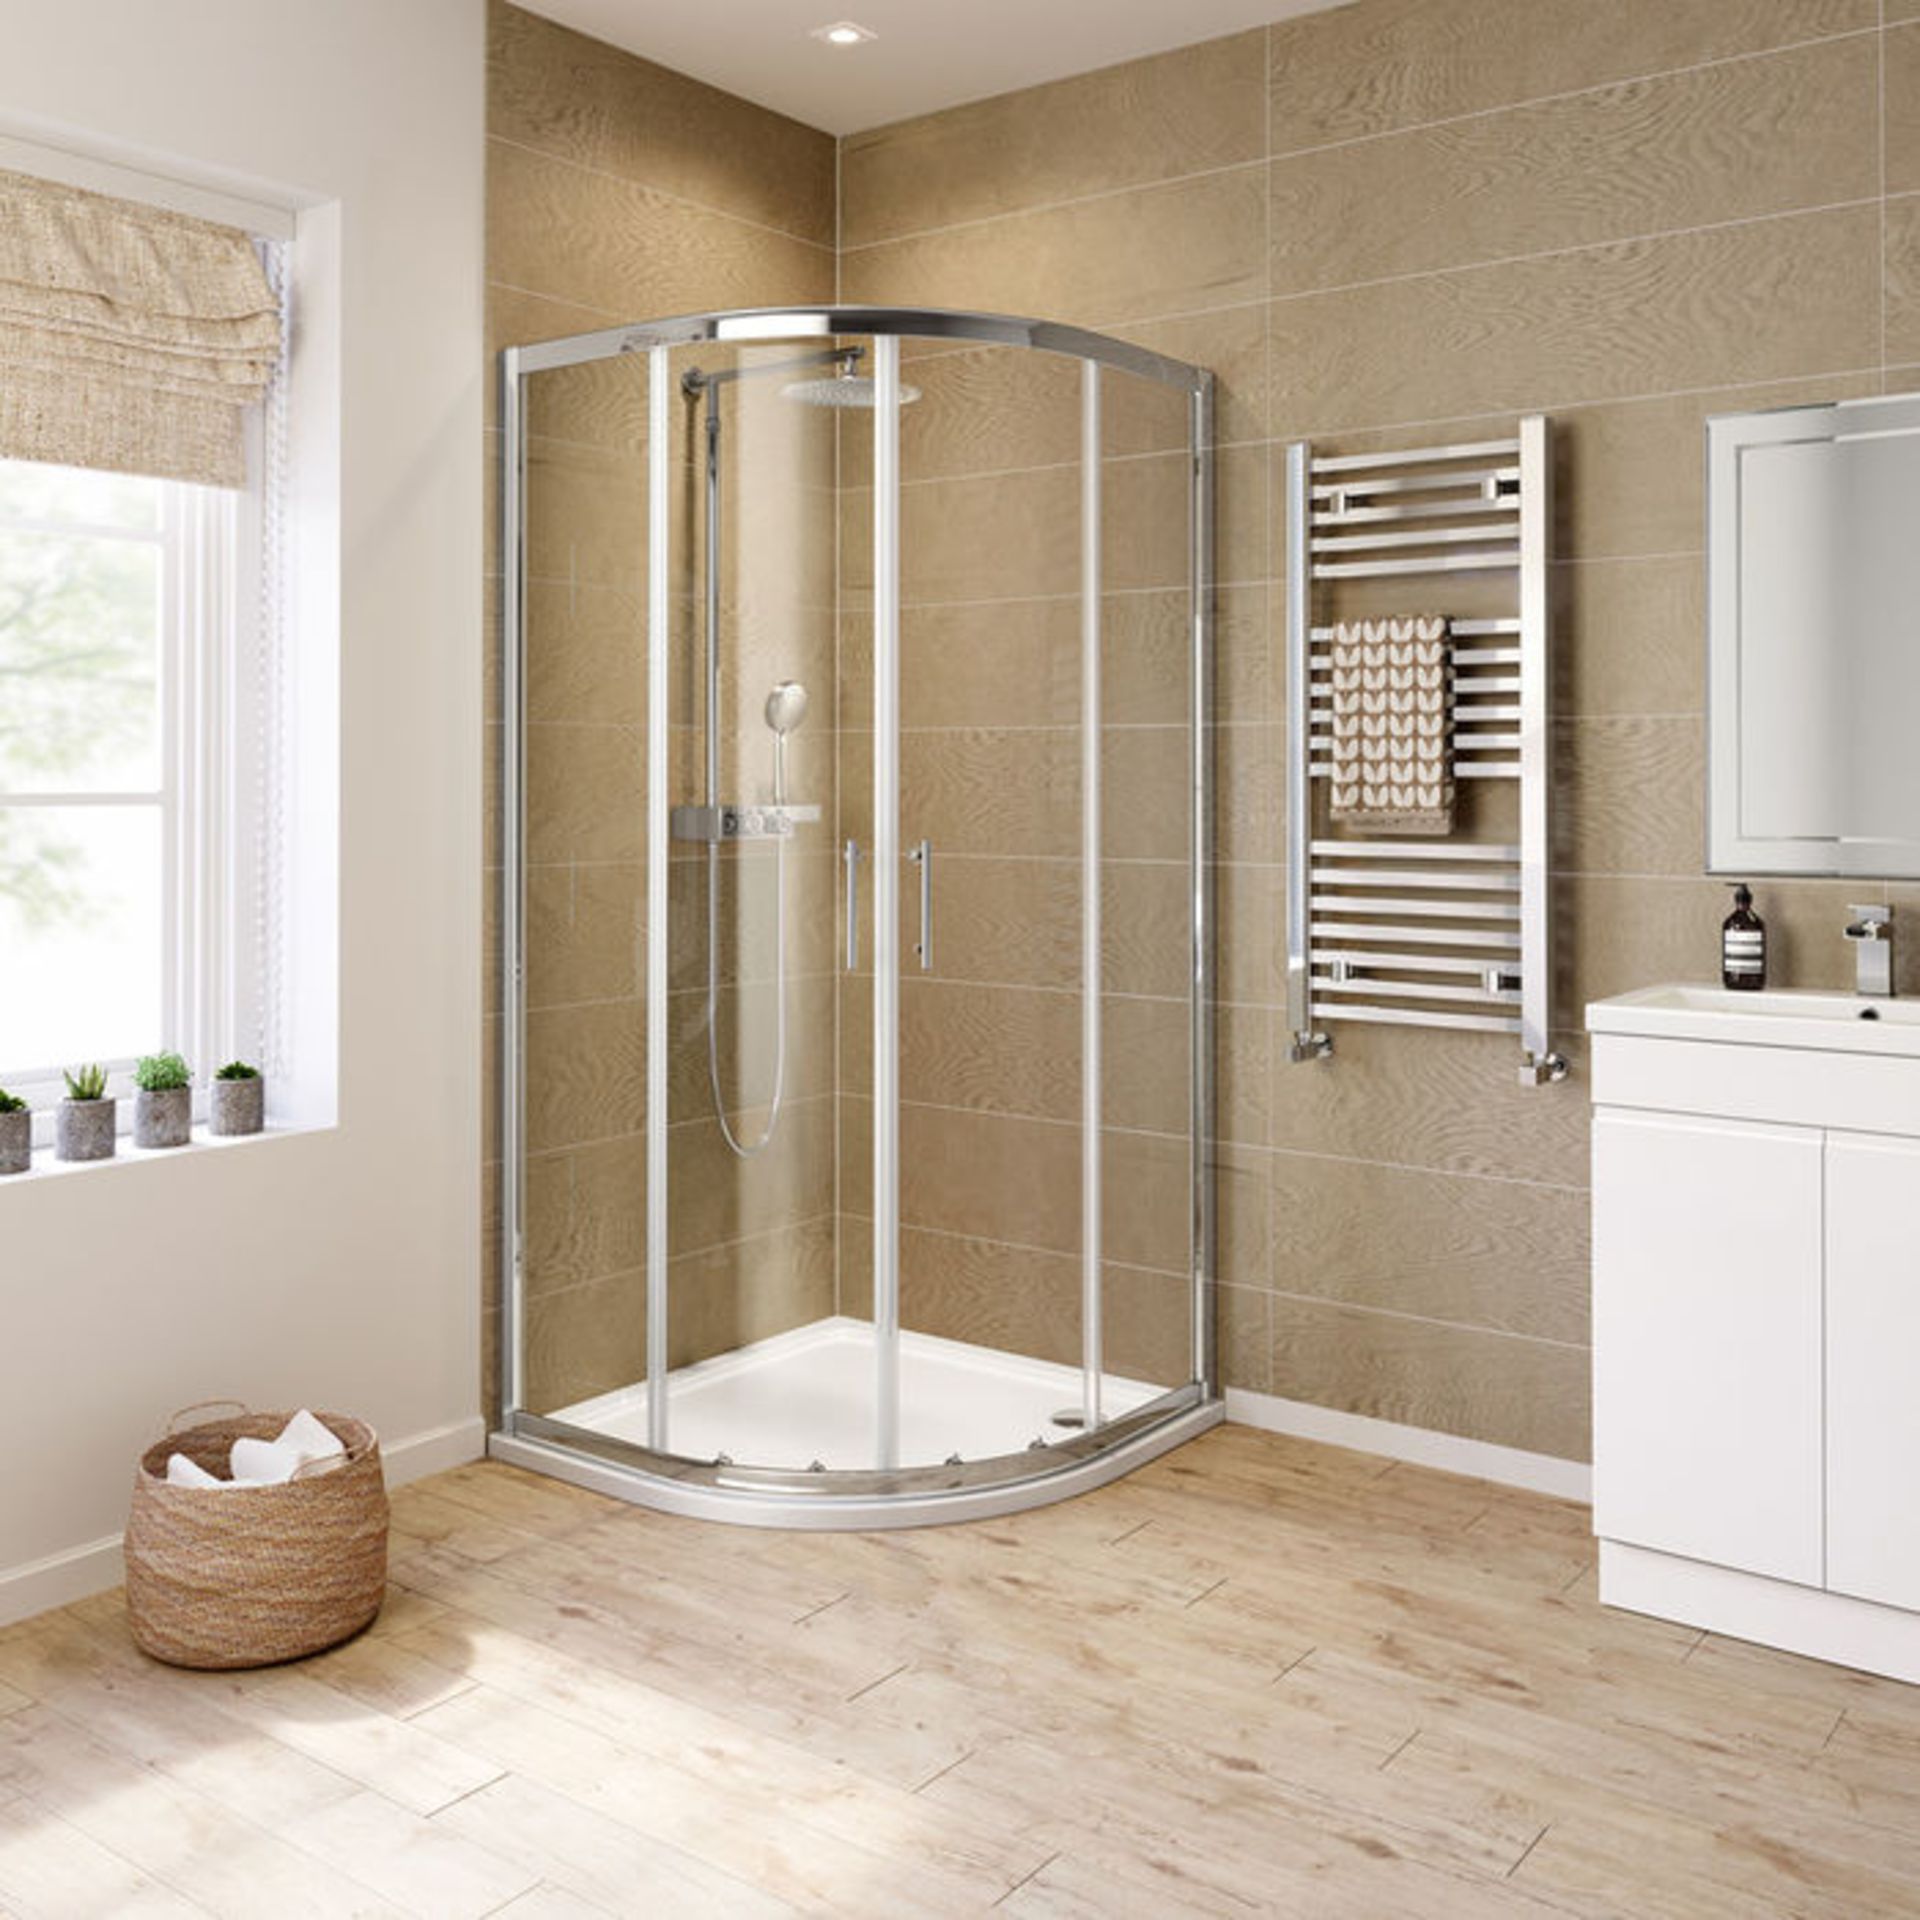 (GR14) 900x900mm - 6mm - Elements Quadrant Shower Enclosure RRP £229.99 6mm Safety Glass Fully - Image 4 of 8